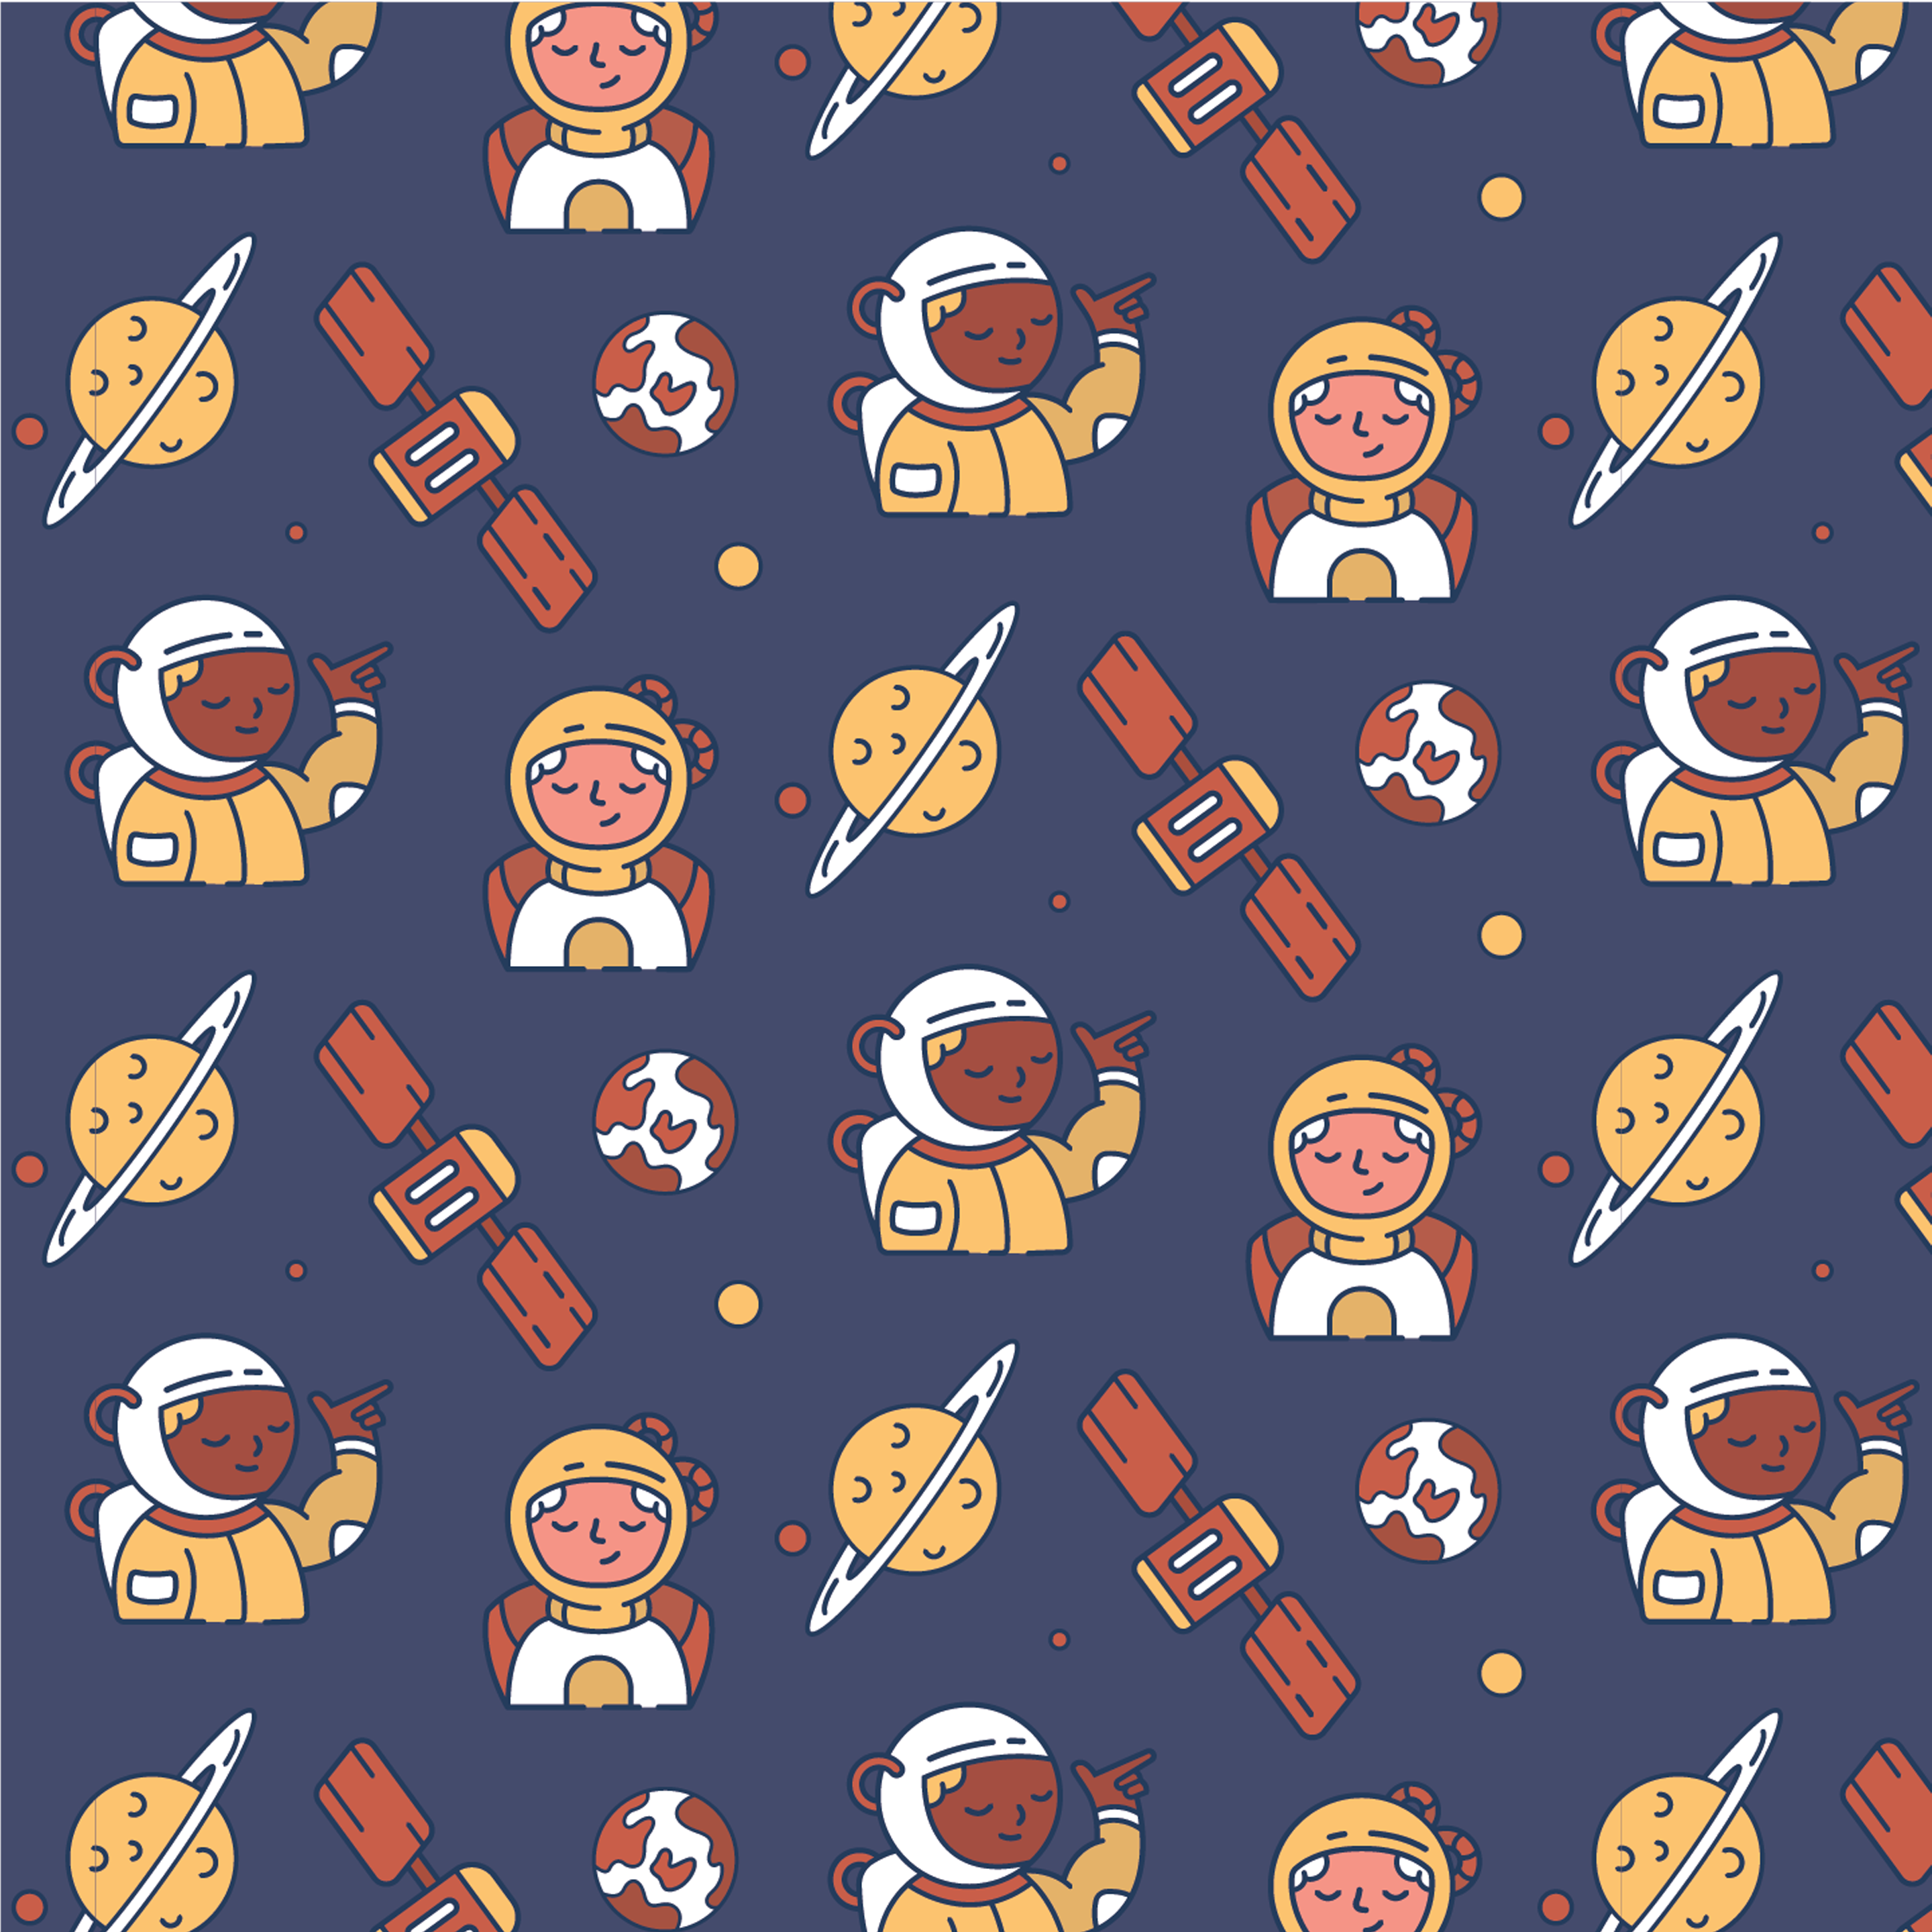 astronauts-in-space-pattern-design-theme.png